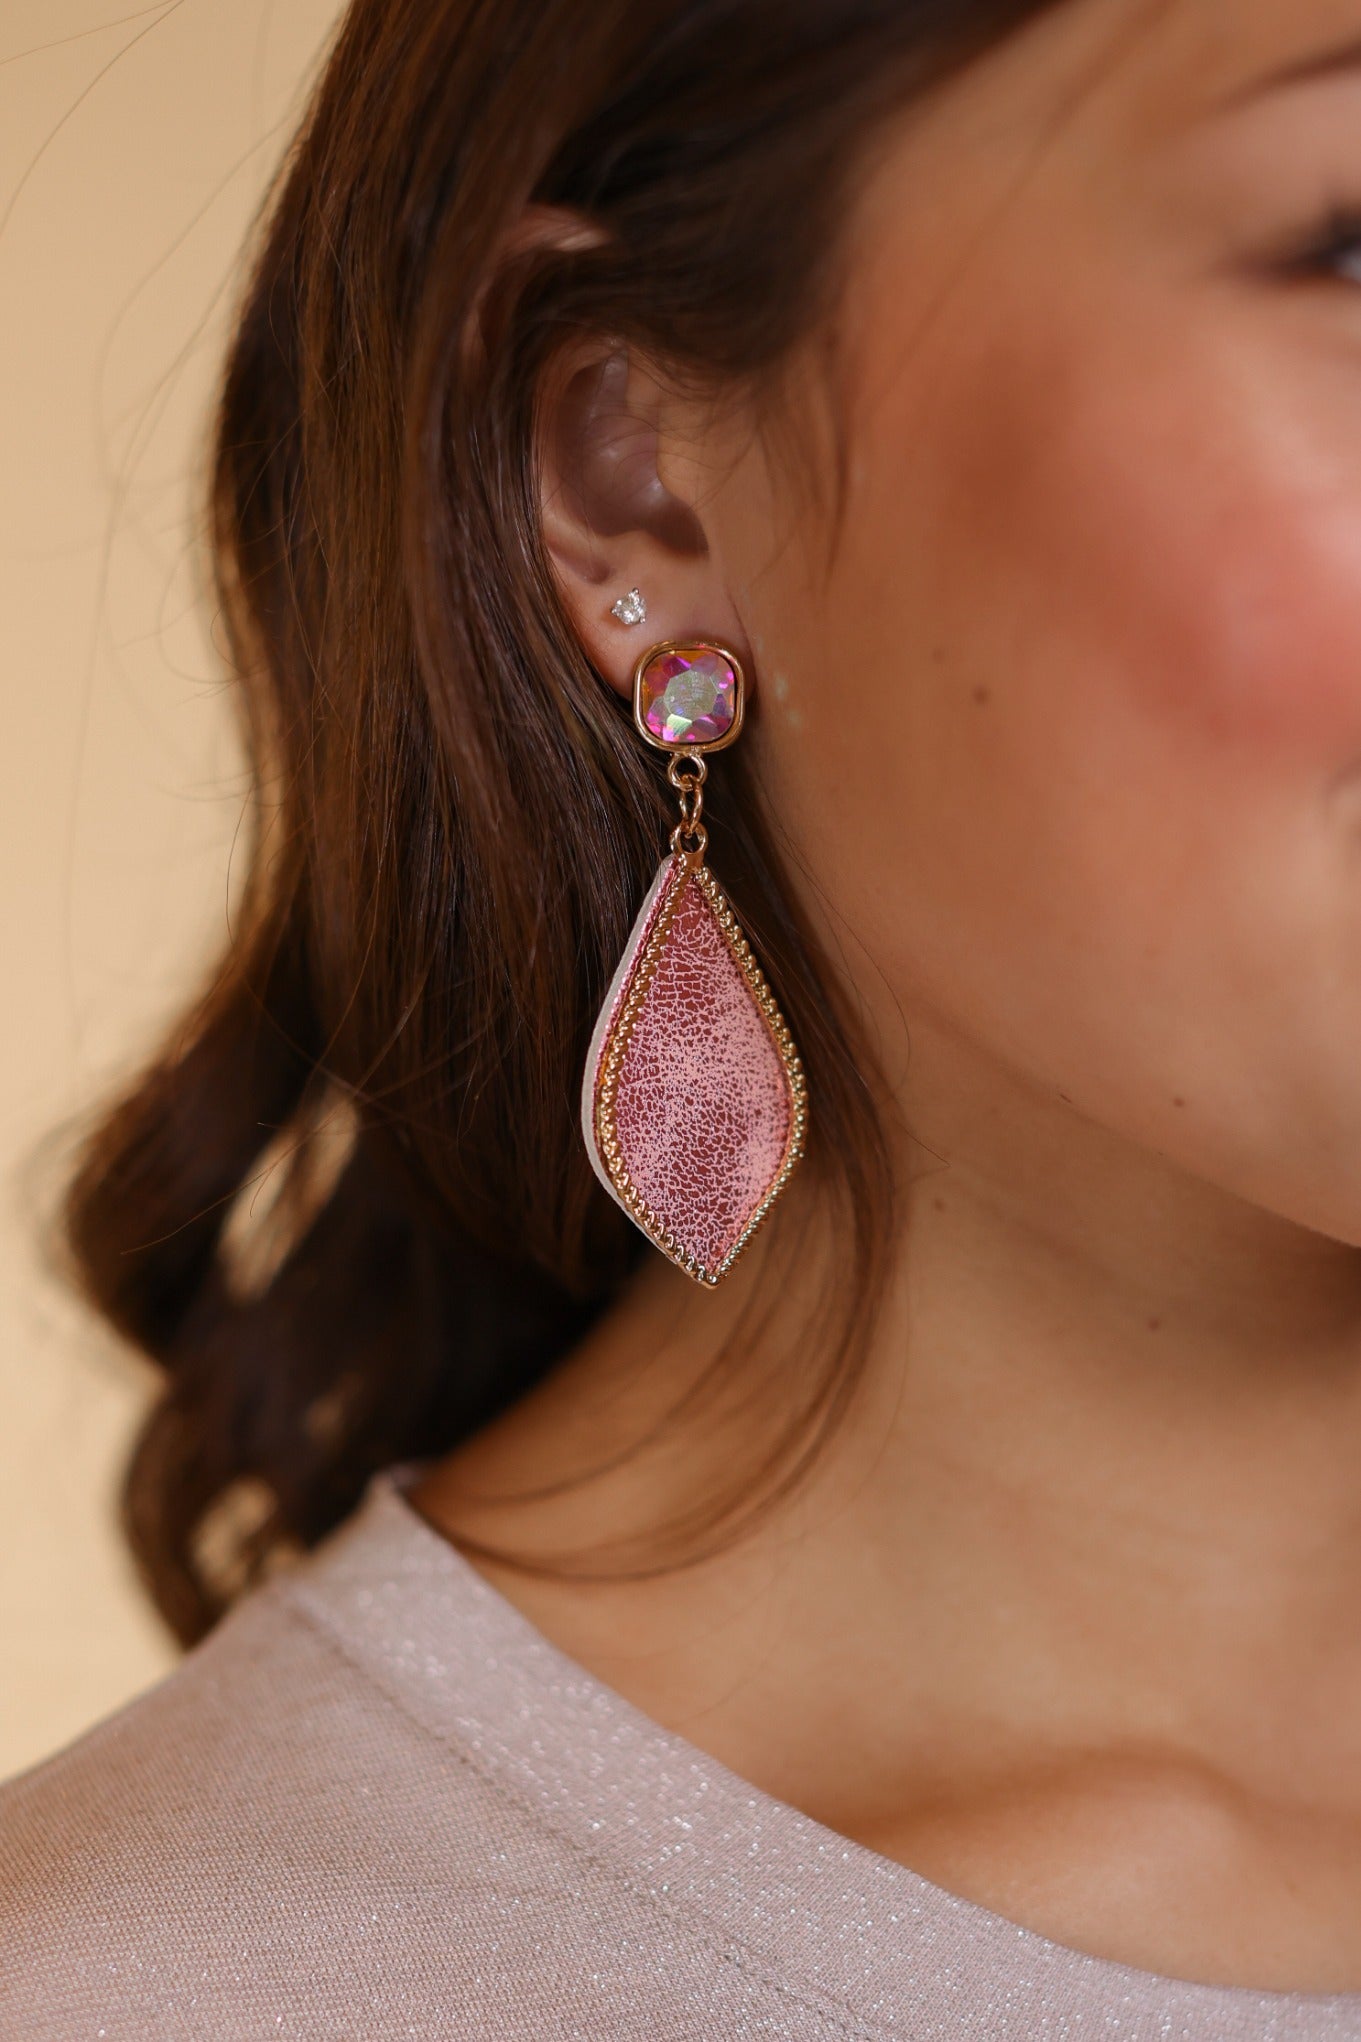 Too Strong to be Dainty Teardrop Earrings with Gold Casing, Pink